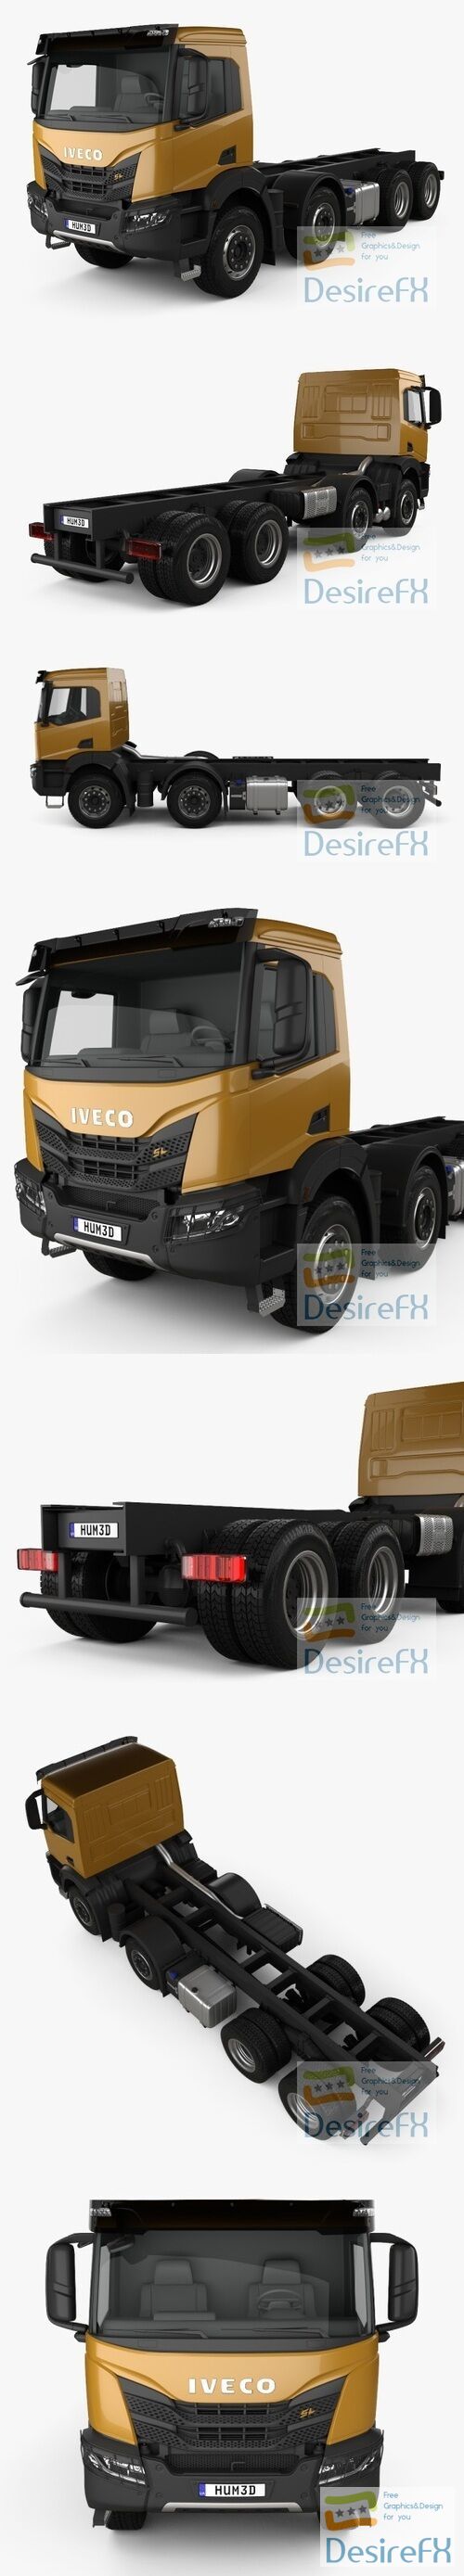 Iveco X-Way Chassis Truck 2020 3D Model